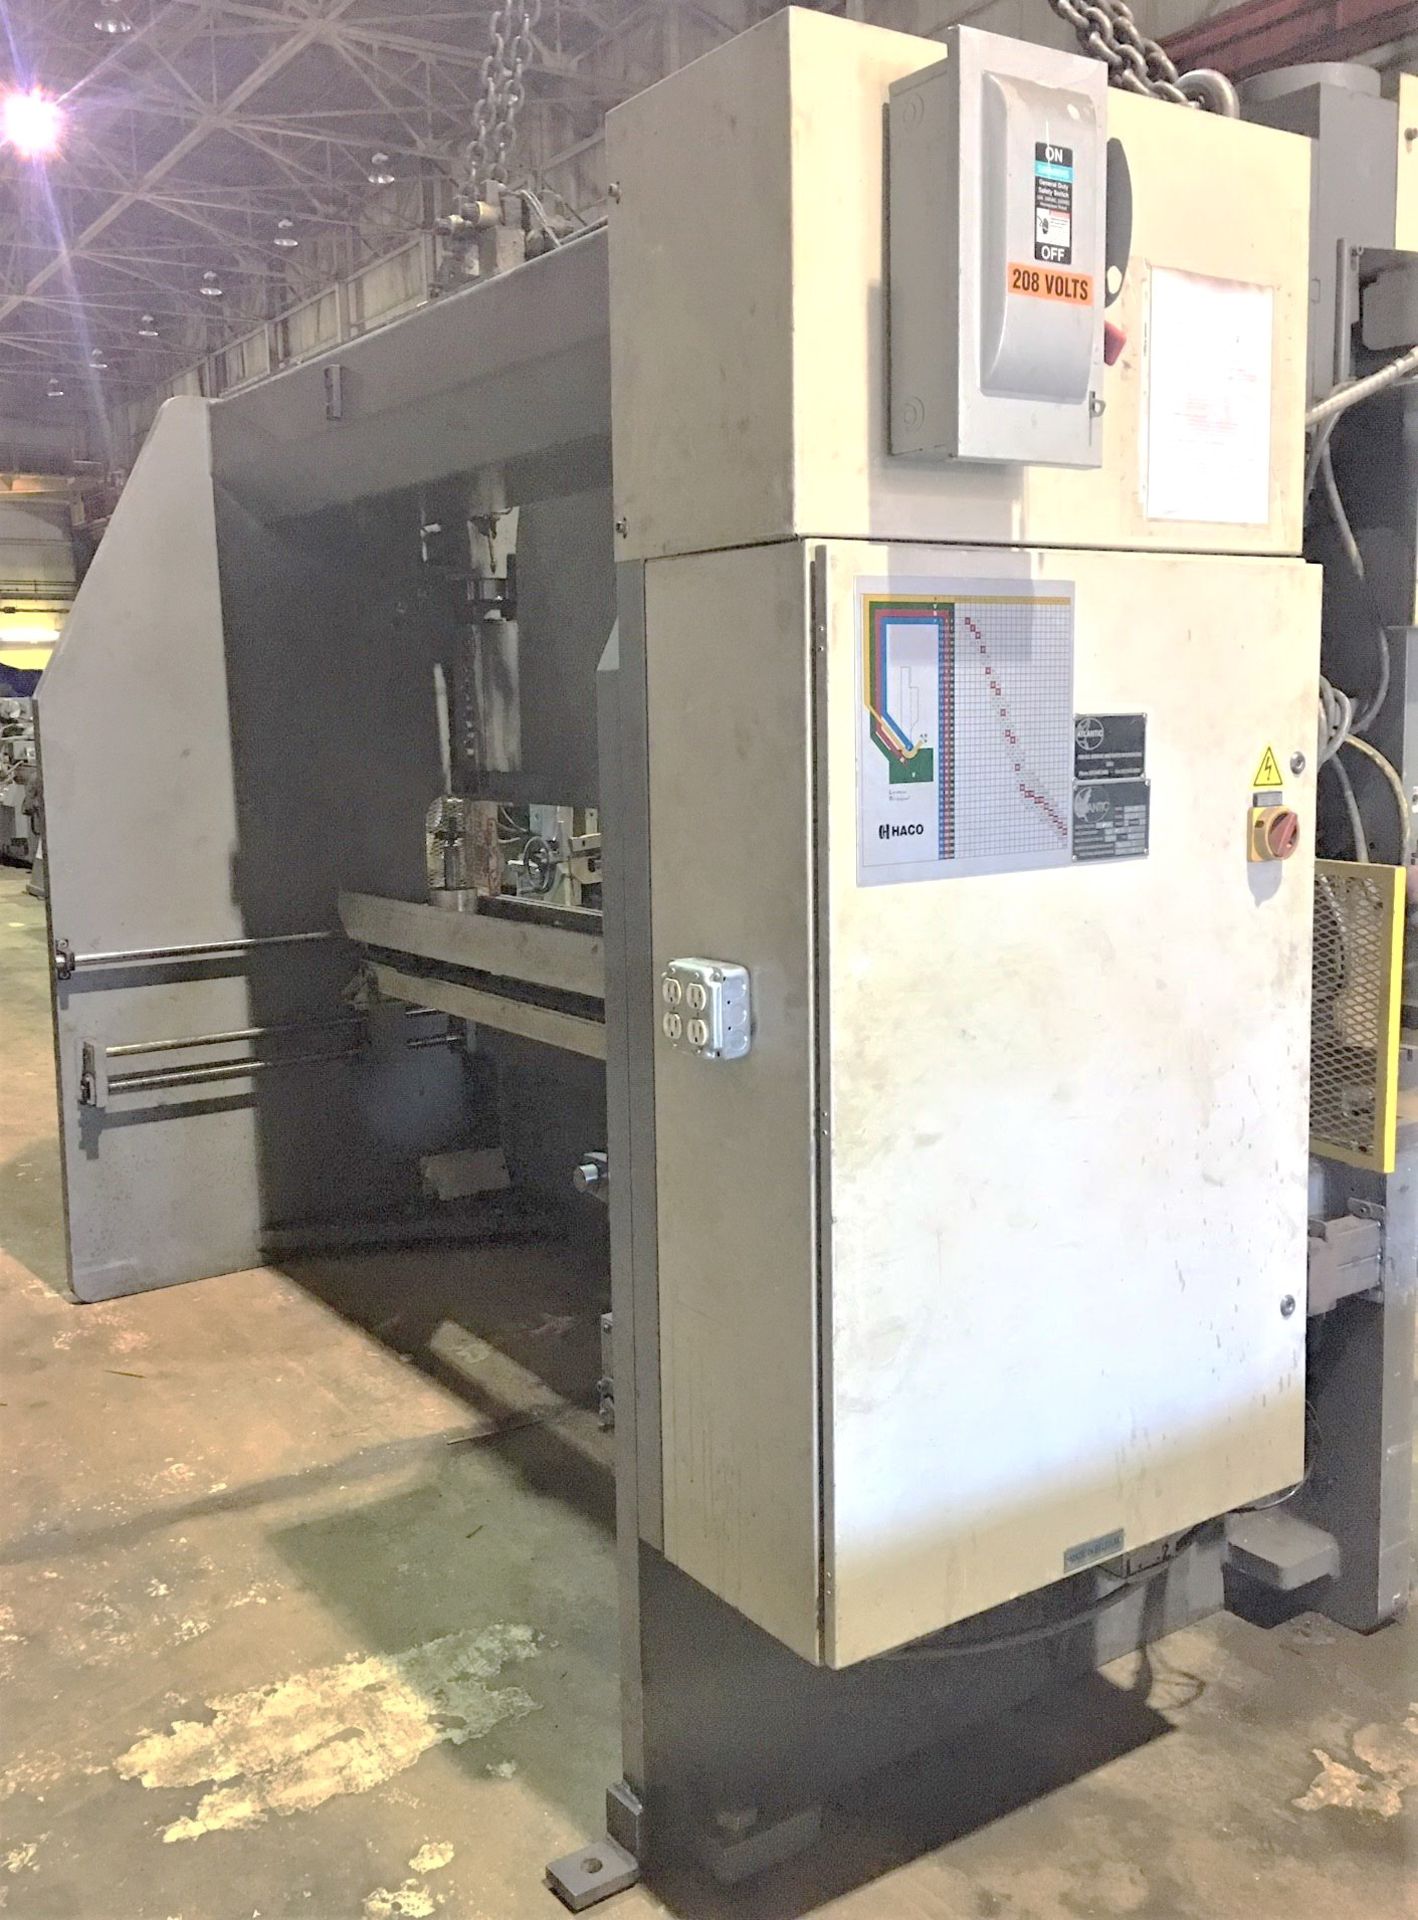 Haco Atlantic CNC Hydraulic Press Brake 120 Ton x 10', Located In Painesville, OH - 8615P - Image 9 of 14